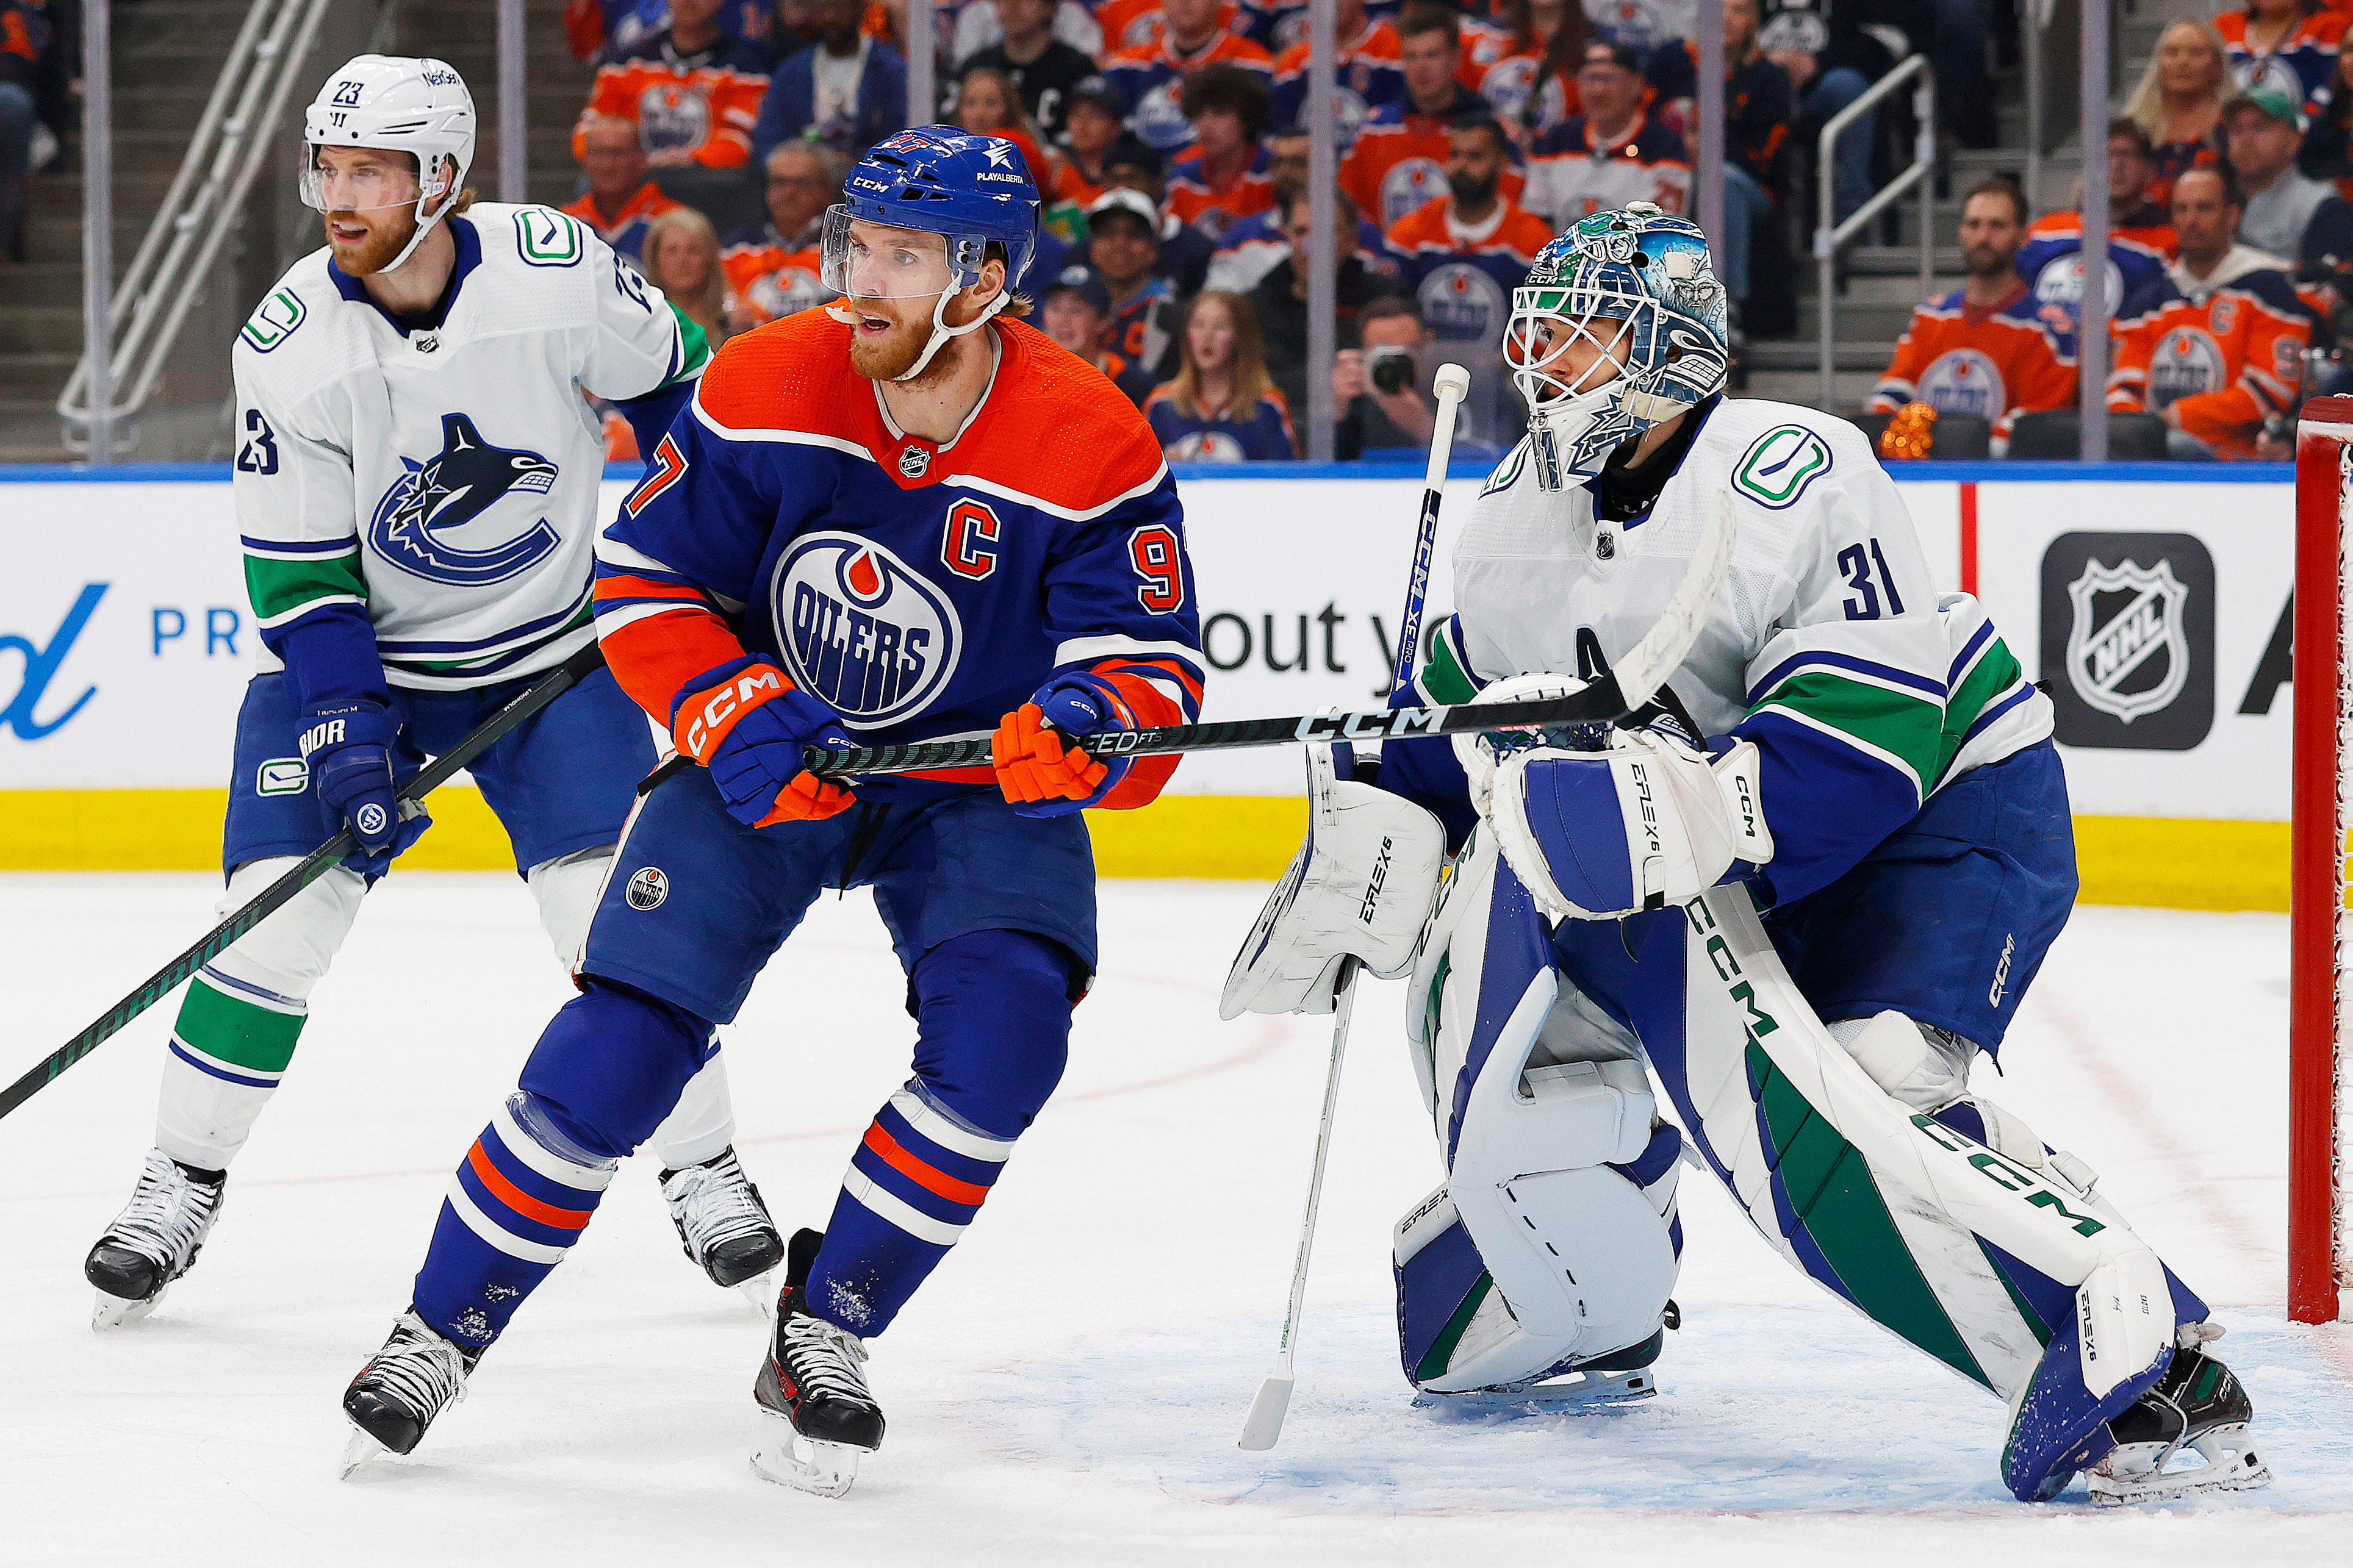 NHL: Stanley Cup Playoffs-Vancouver Canucks at Edmonton Oilers